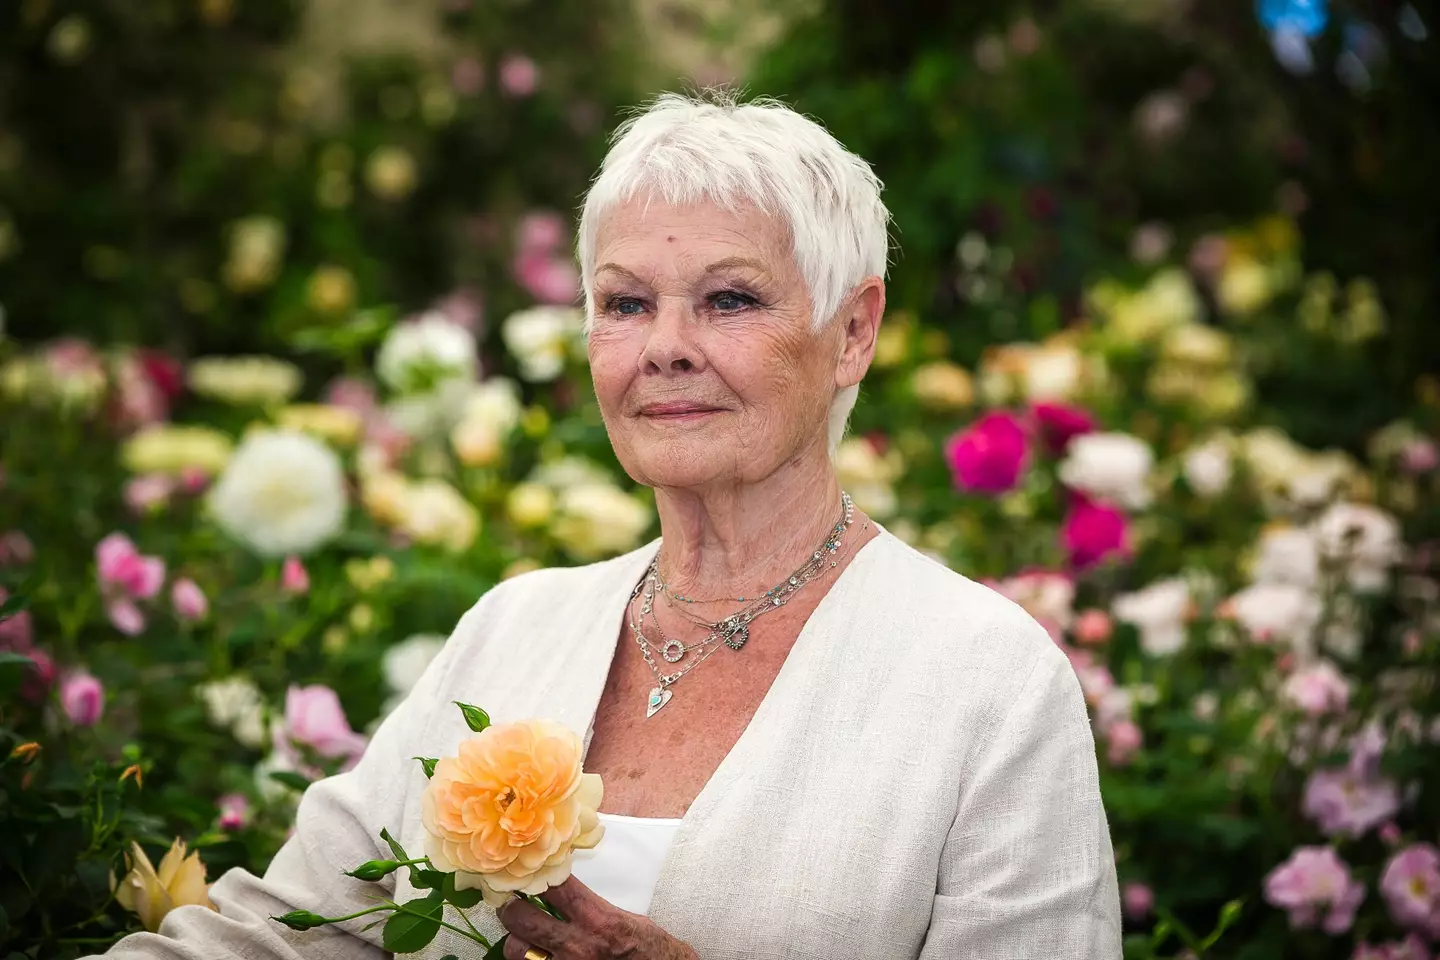 Dench revealed the effect of her macular degeneration on her ability to learn lines.